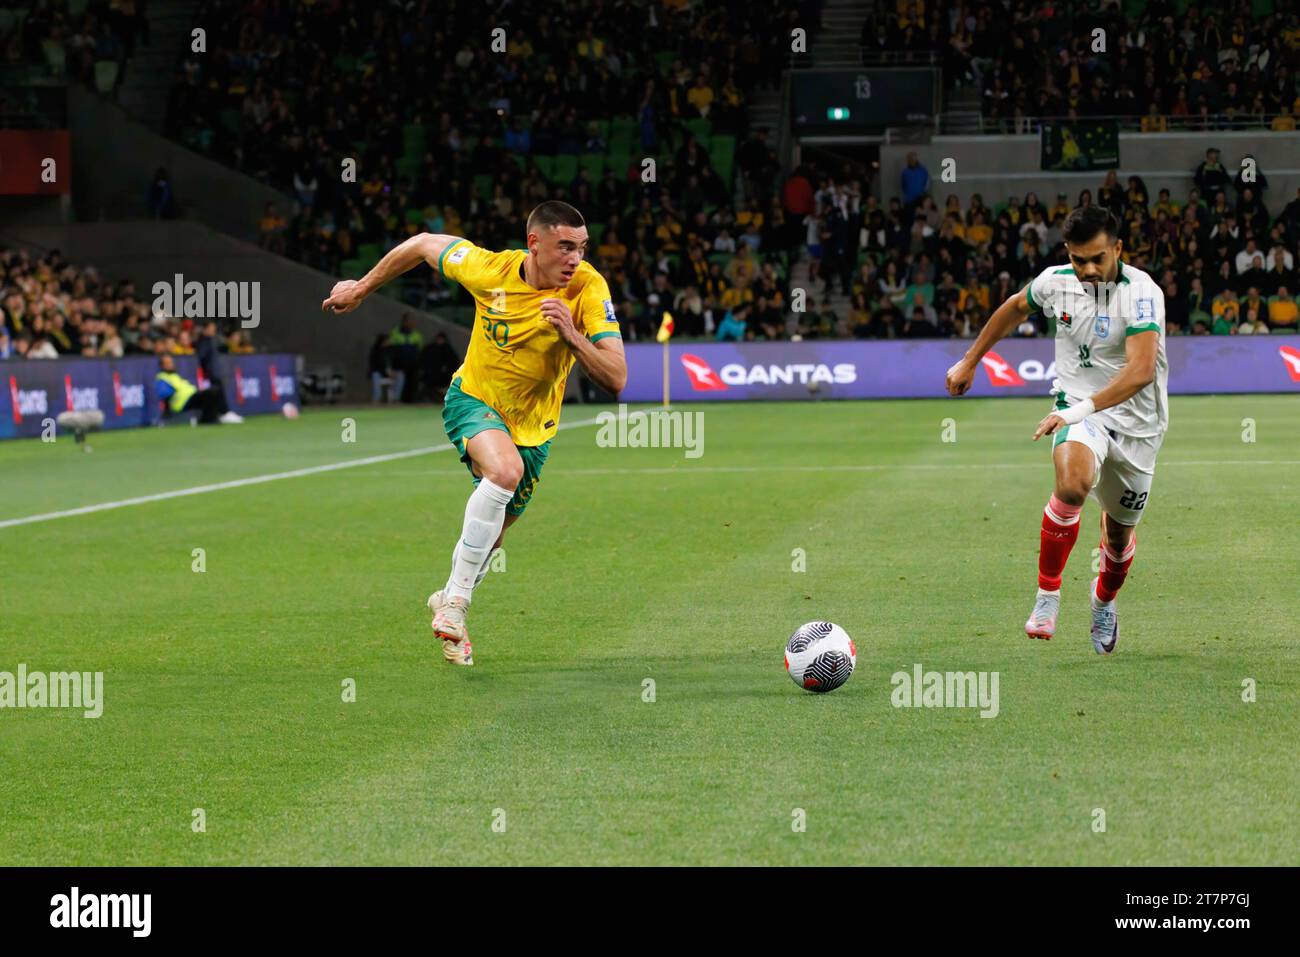 Lewis Miller of Australia in action during the FIFA World Cup 2026 AFC Asian Qualifying game between Australia and Bangladesh. Australia won the game 7 : 0. Stock Photo